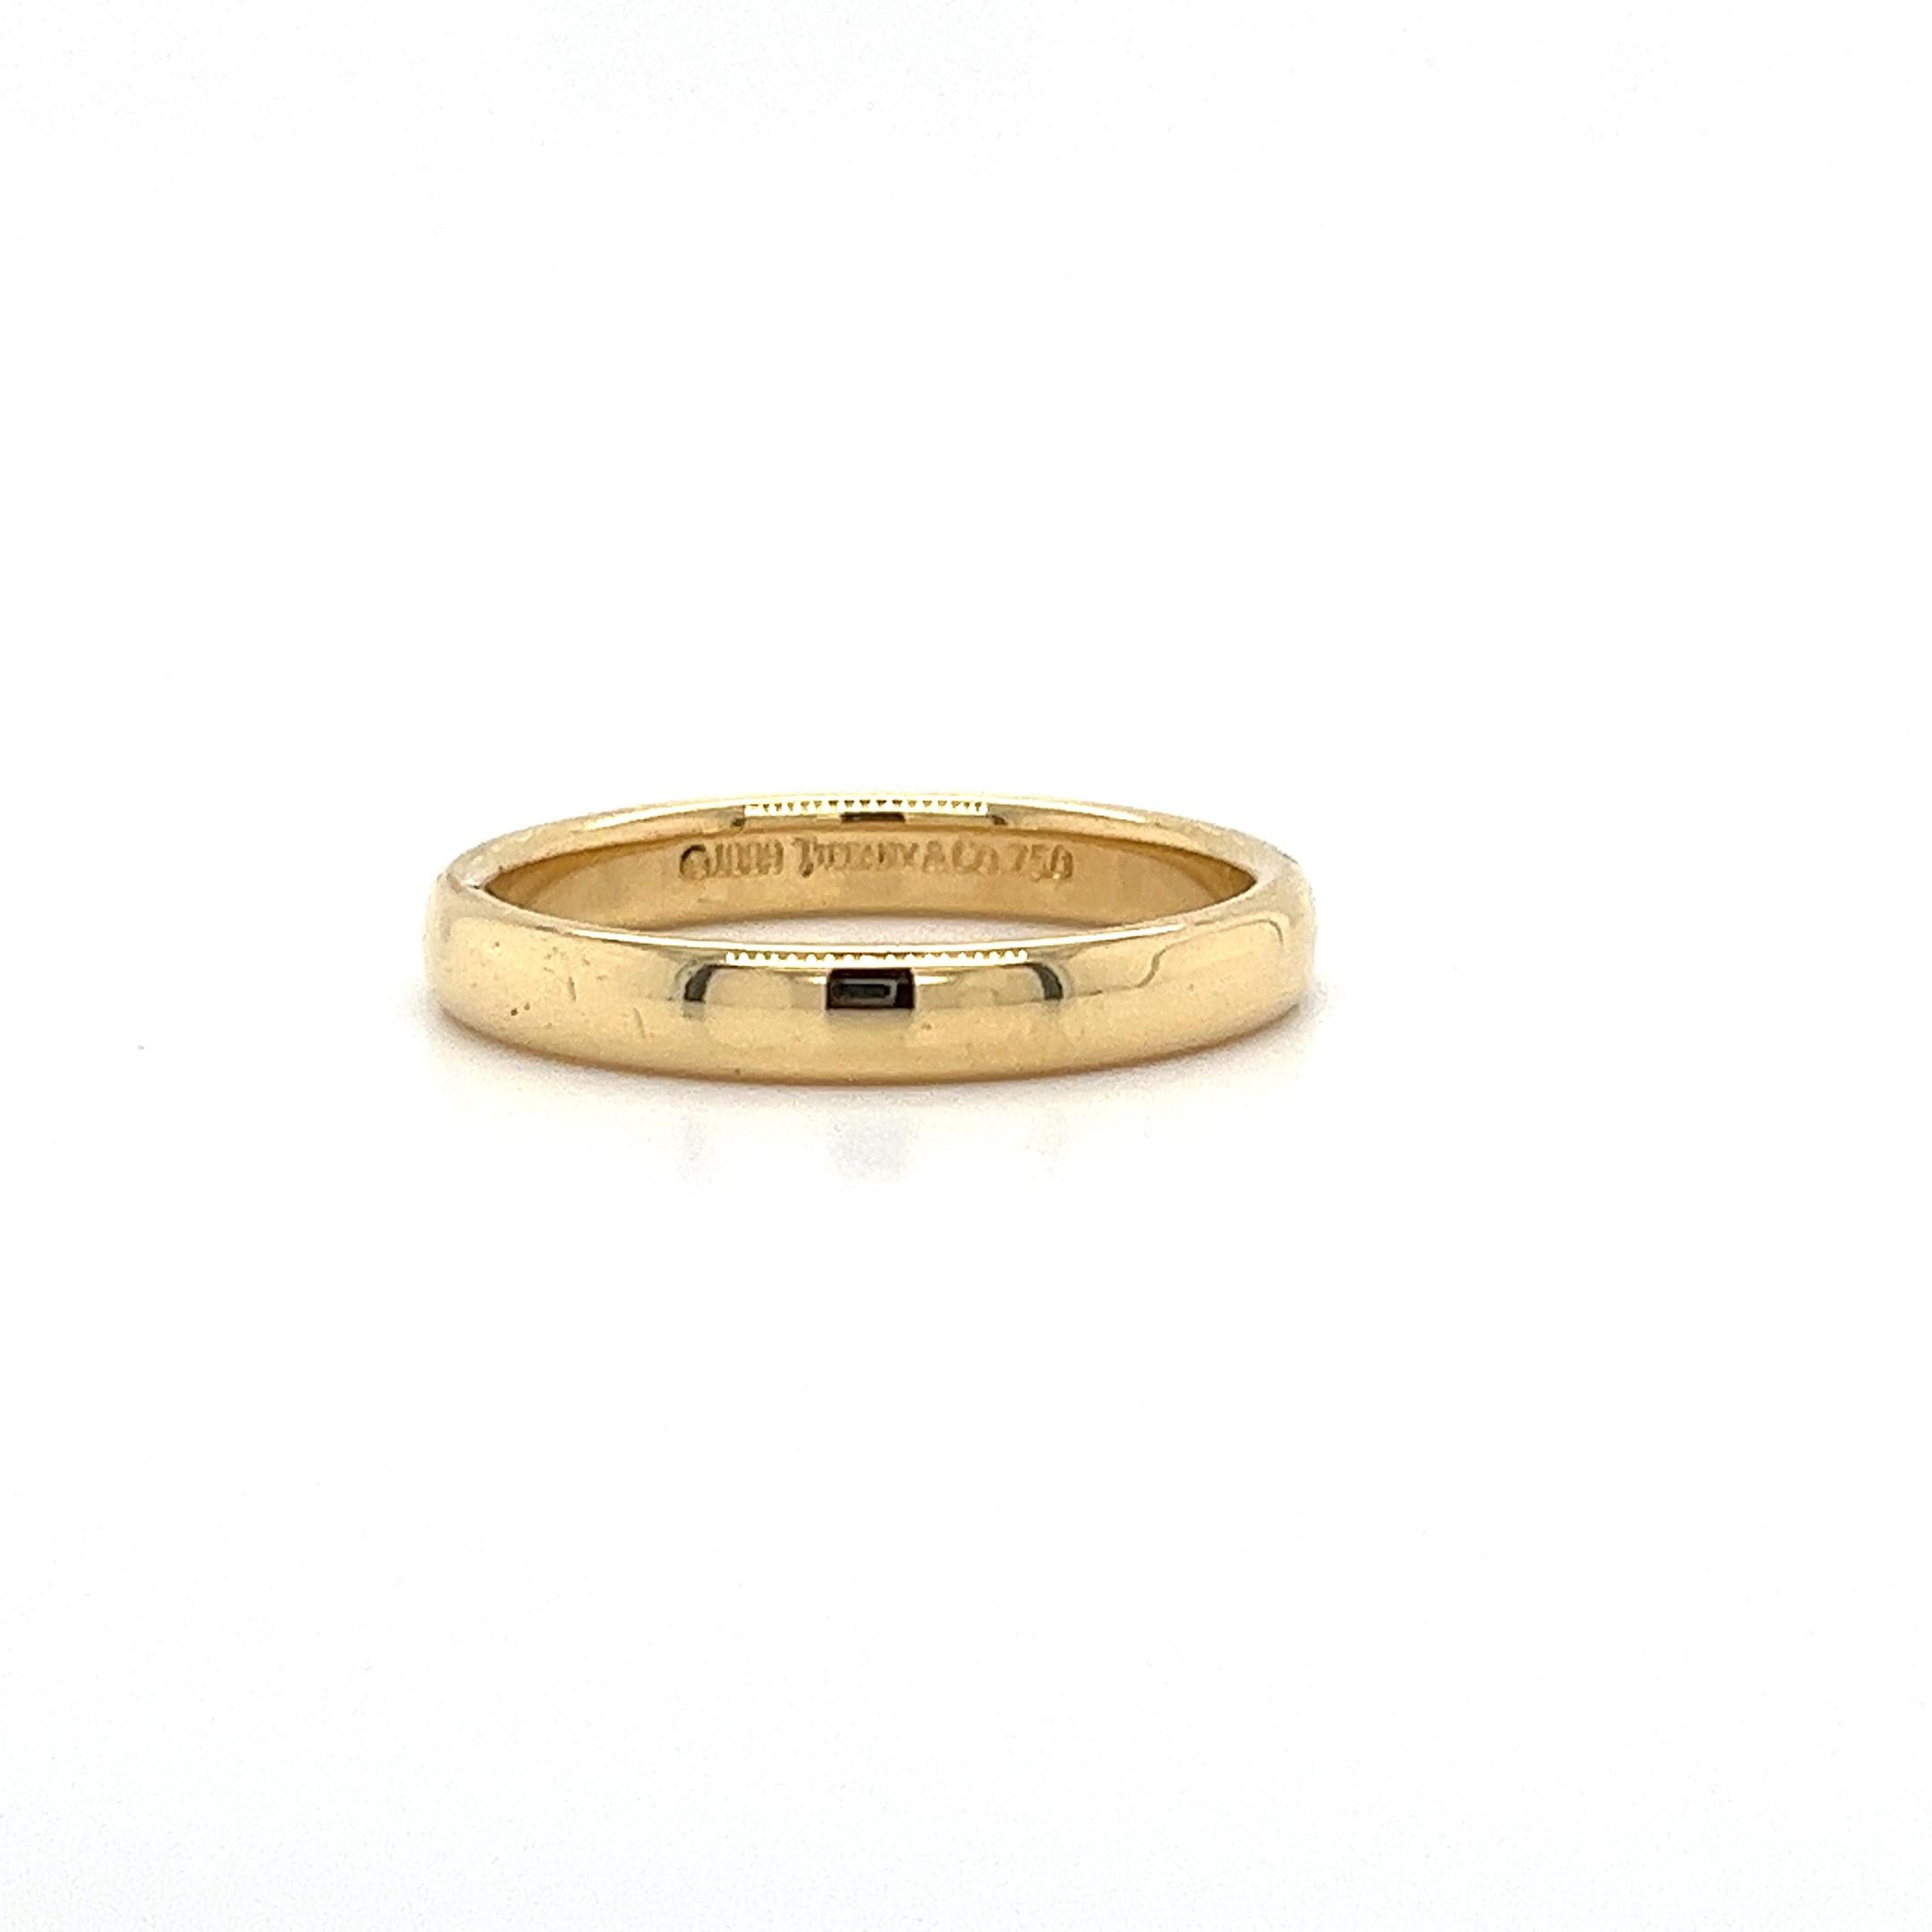 Tiffany & Co. signed 18 karat solid yellow gold wedding band ring. A simple, lasting message of commitment and love. Made better by legendary New York jeweler, Tiffany and Company. At 3mm, this wedding band is a sleek ring option with just the right